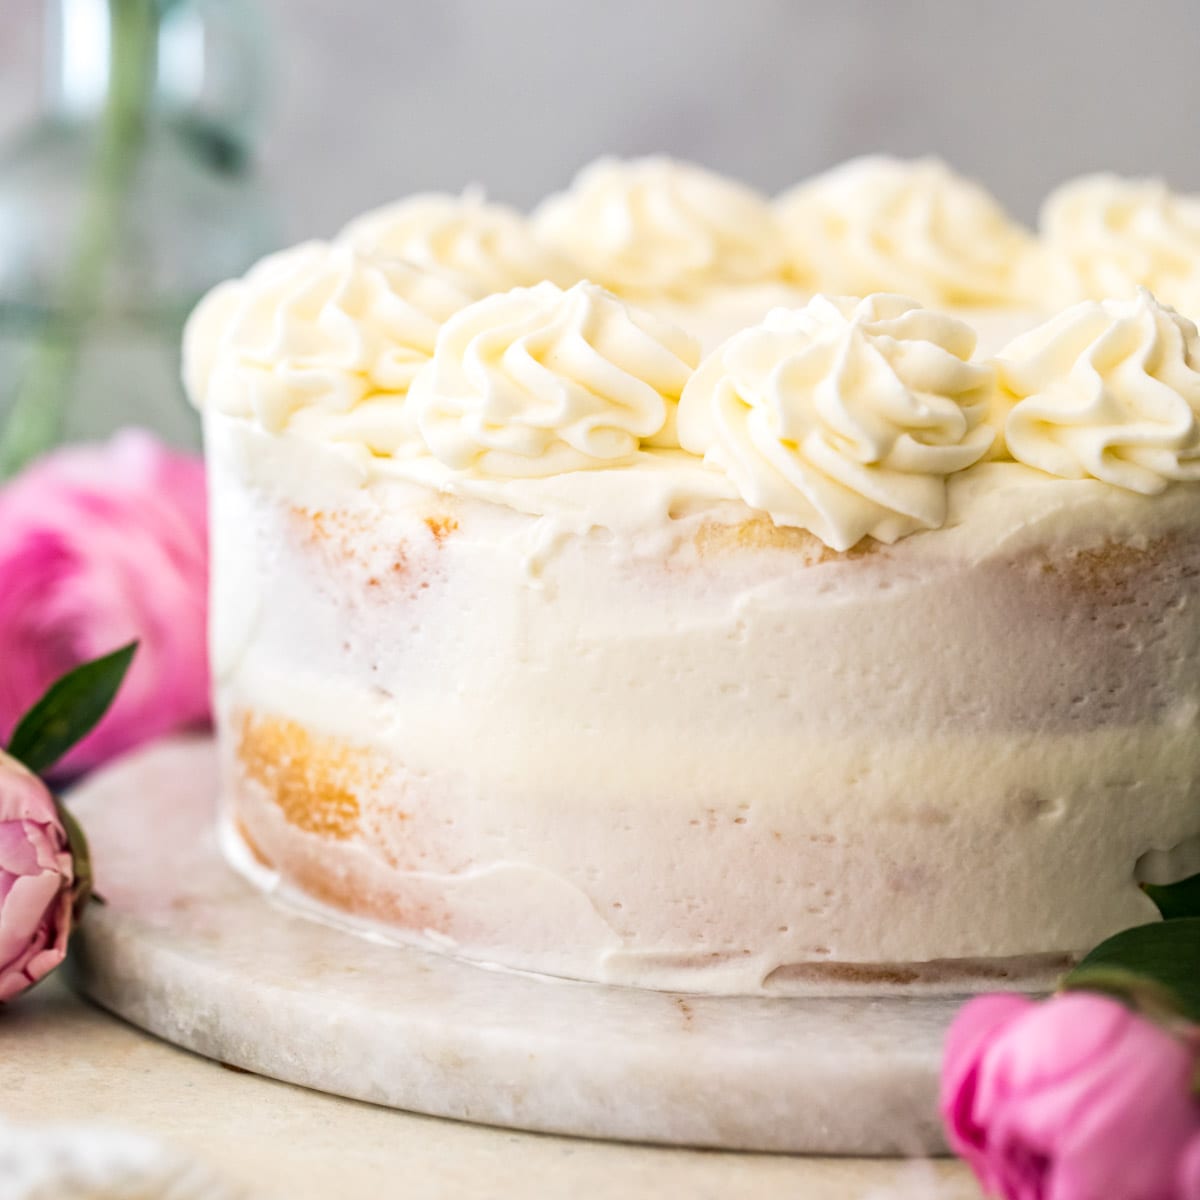 lightly frosted lemon cake consisting of two layers of white cake filled with lemon curd